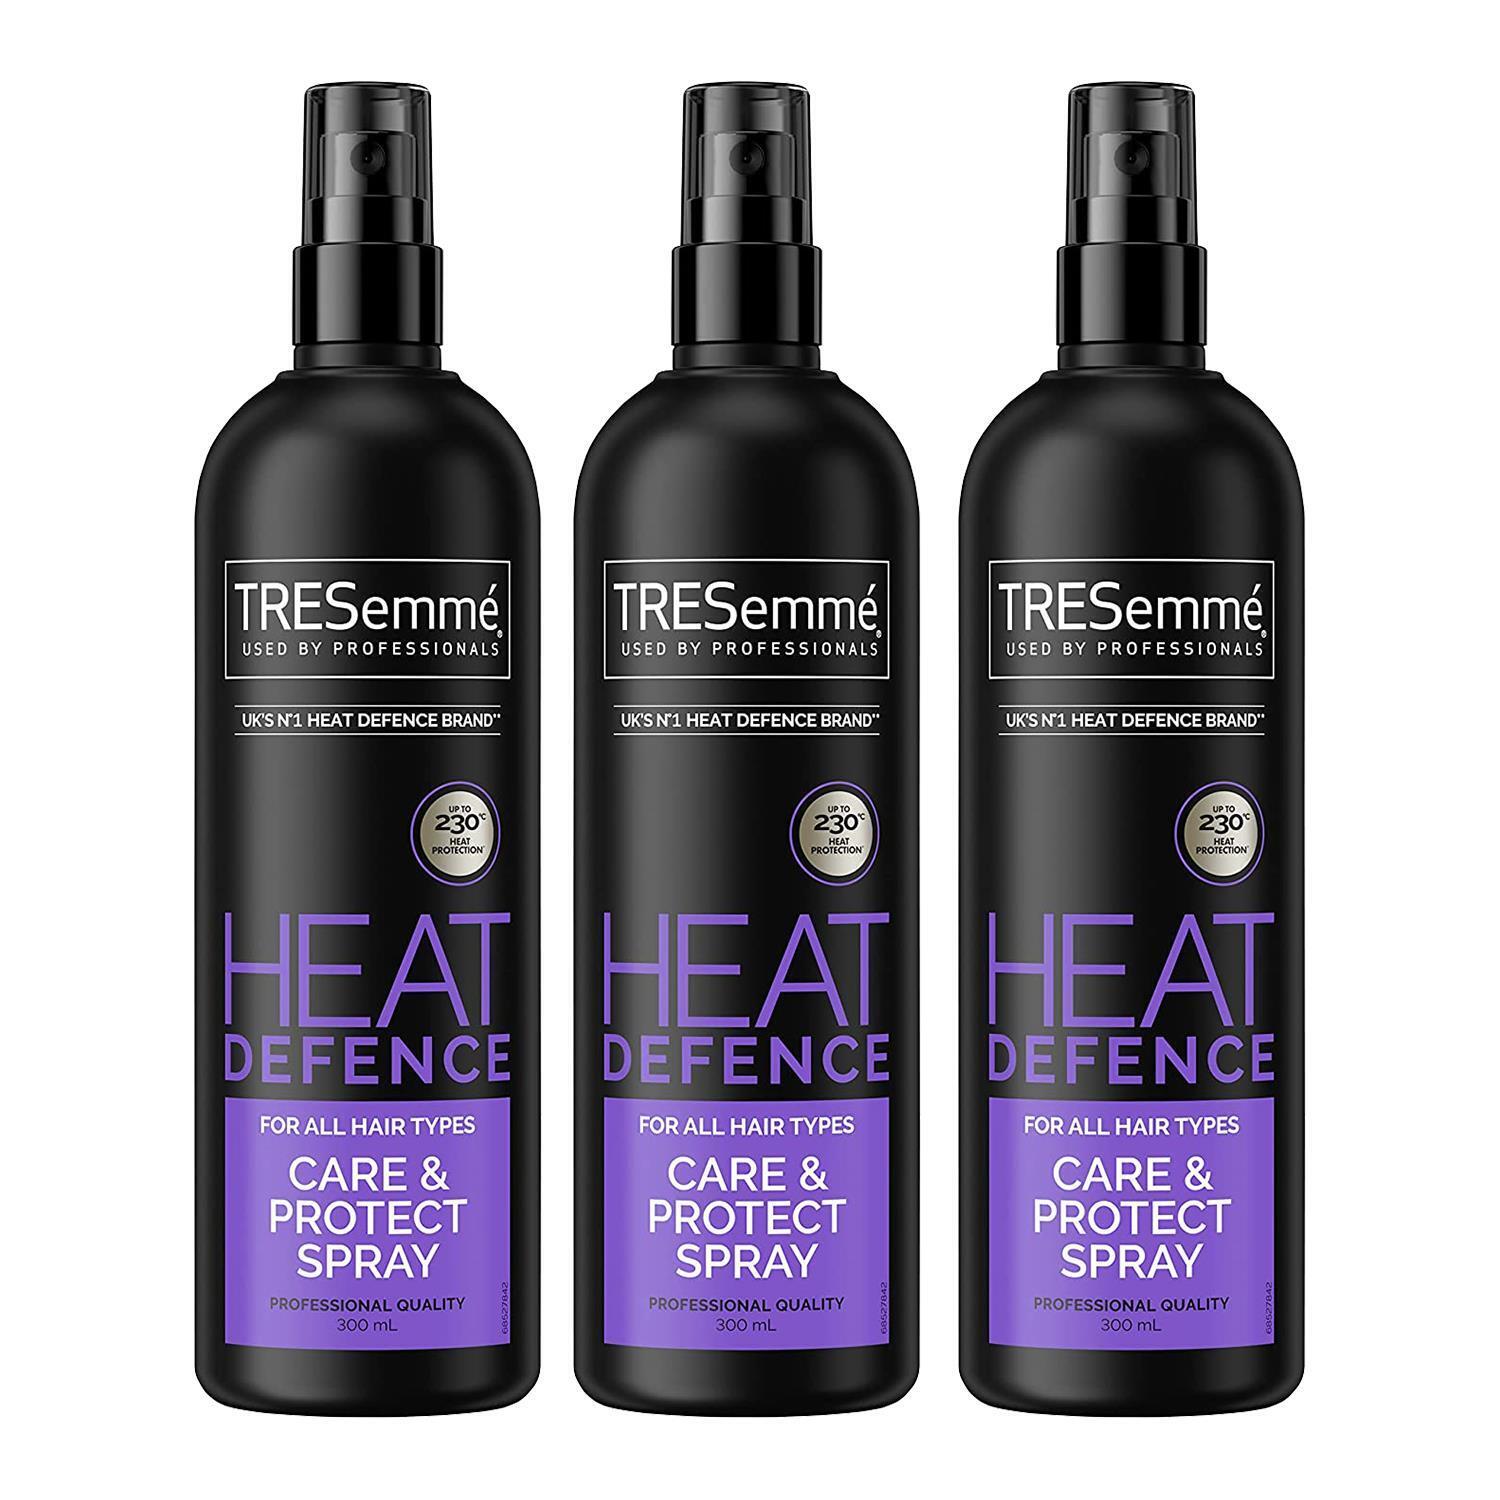 TRESemme Heat Defence Up to 230*C* Protection Hair Spray, 3 Pack, 300ml  5012254061145 | eBay